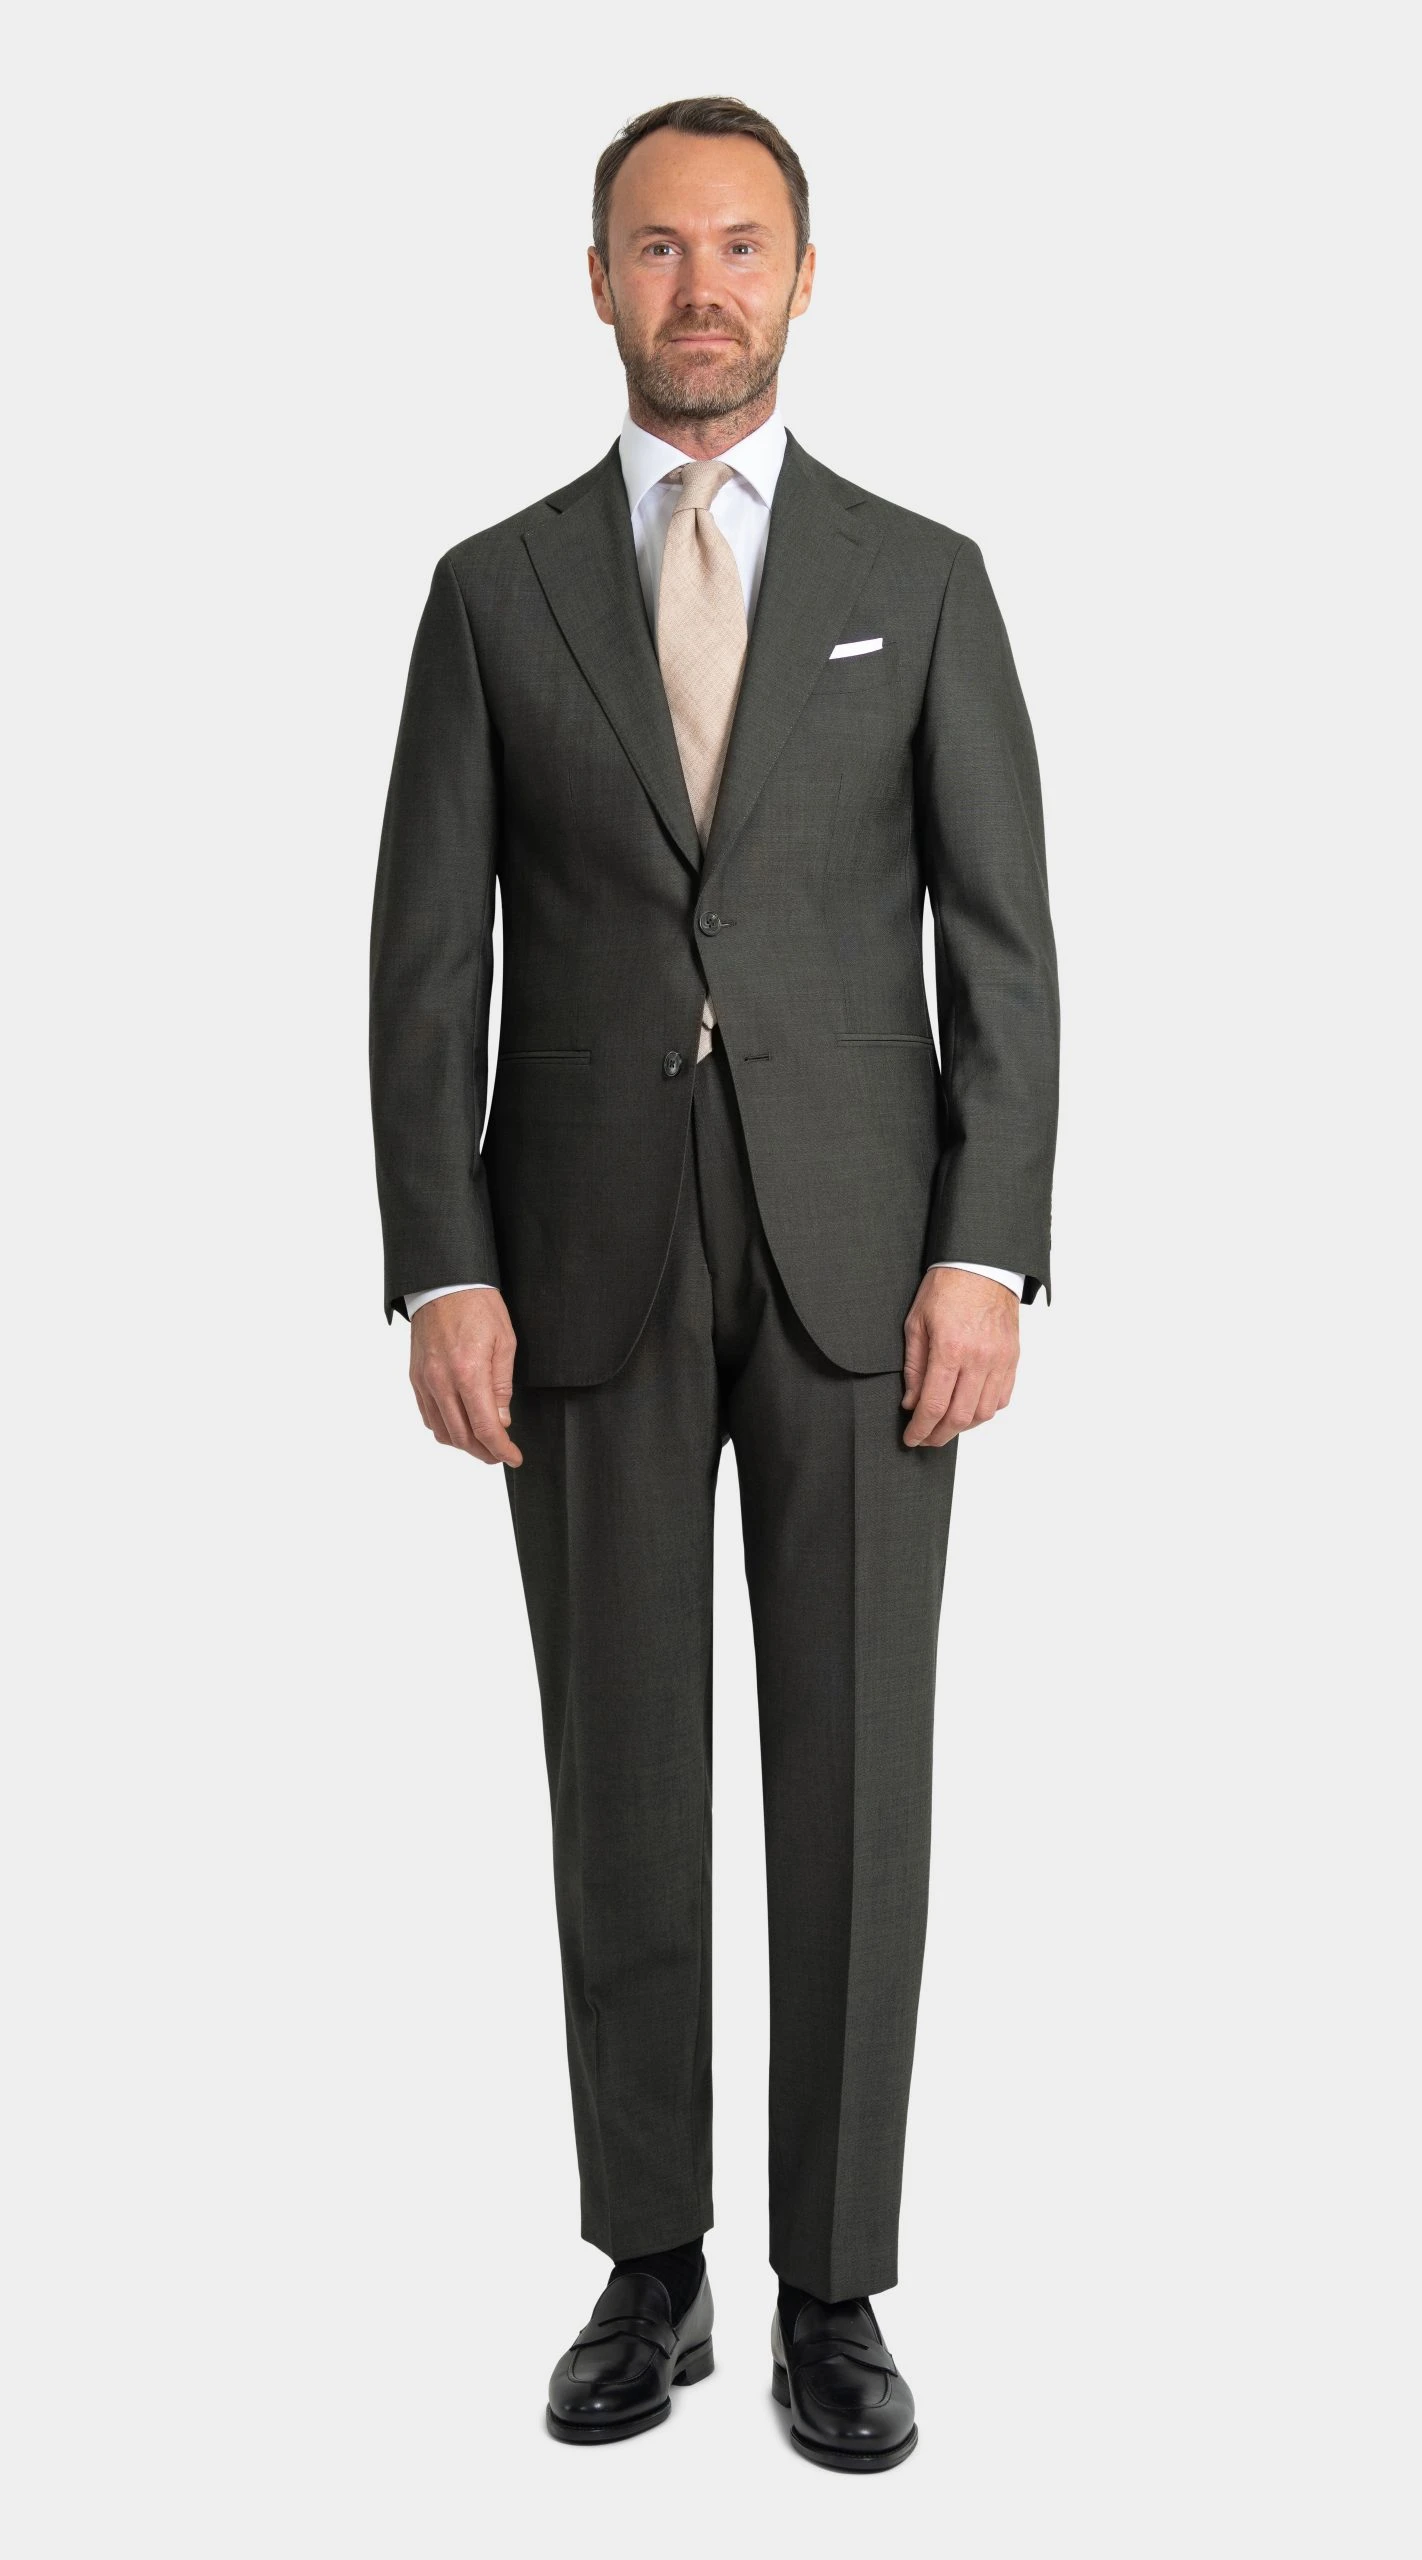 NEW forest green suit in twistair, with beige necktie and black patent shoes